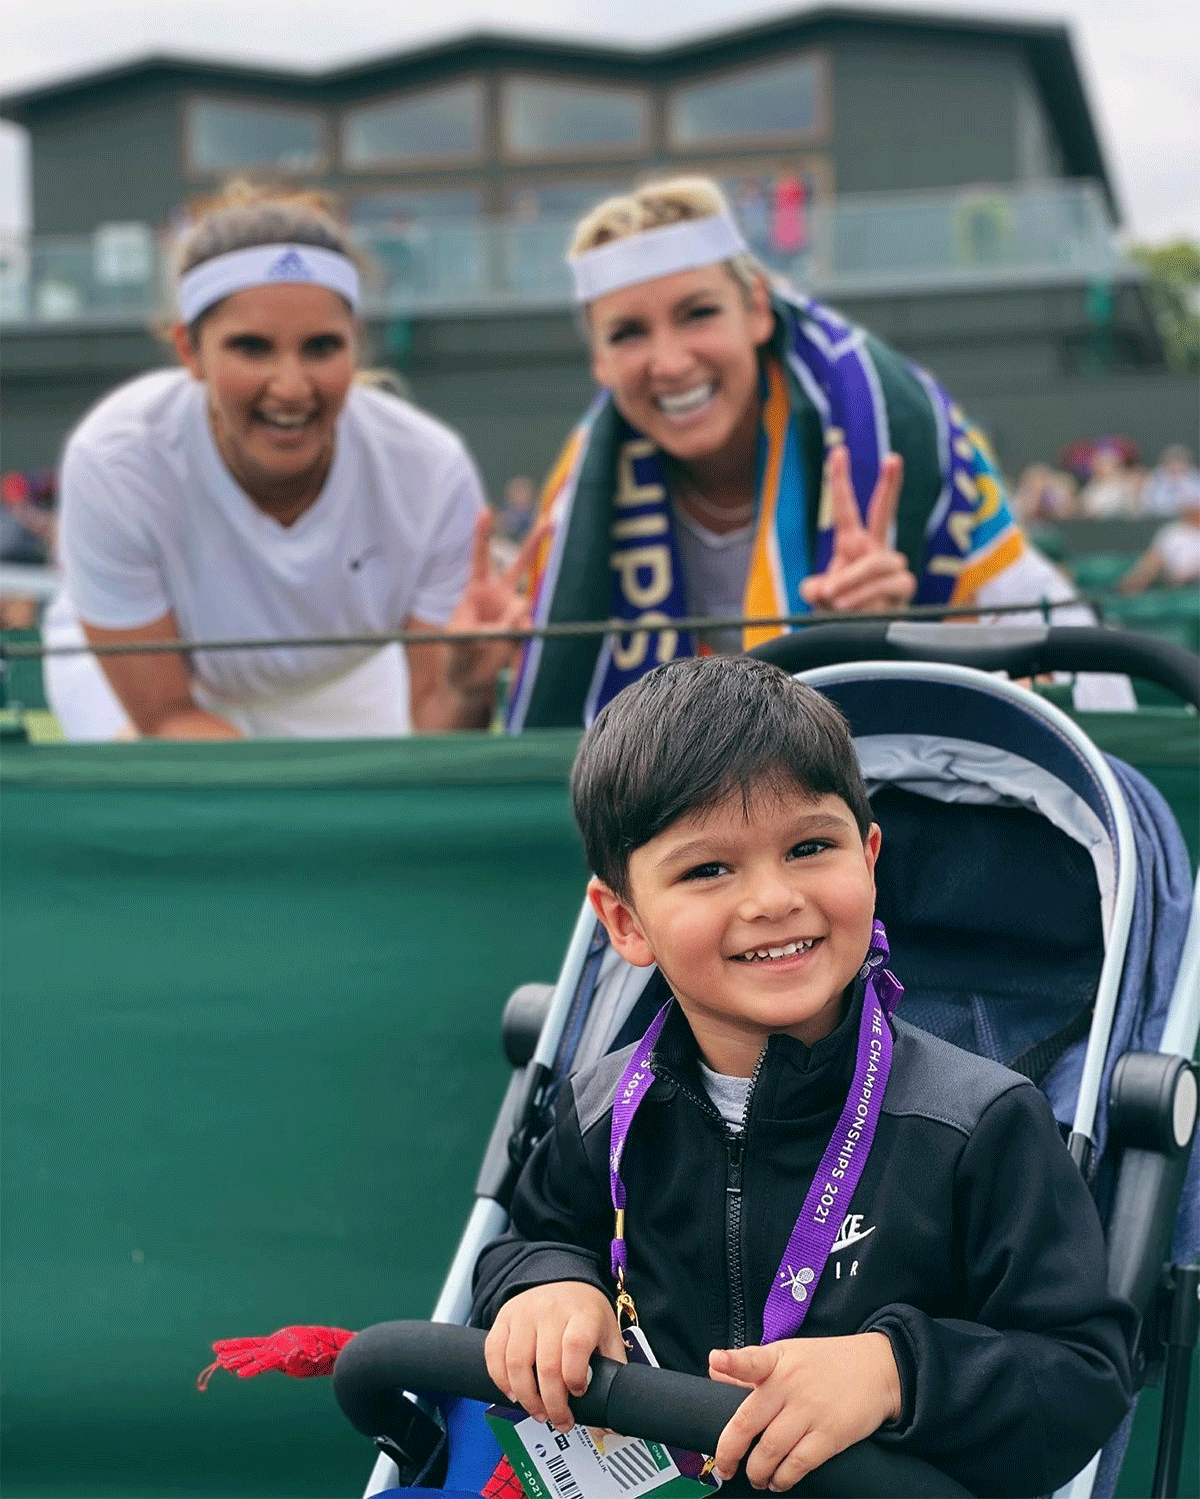 Izhaan Mirza Malik is all smiles as his mommy dearest Sania Mirza and her doubles partner Bethanie Mattek-Sands are all smiles after their first round win